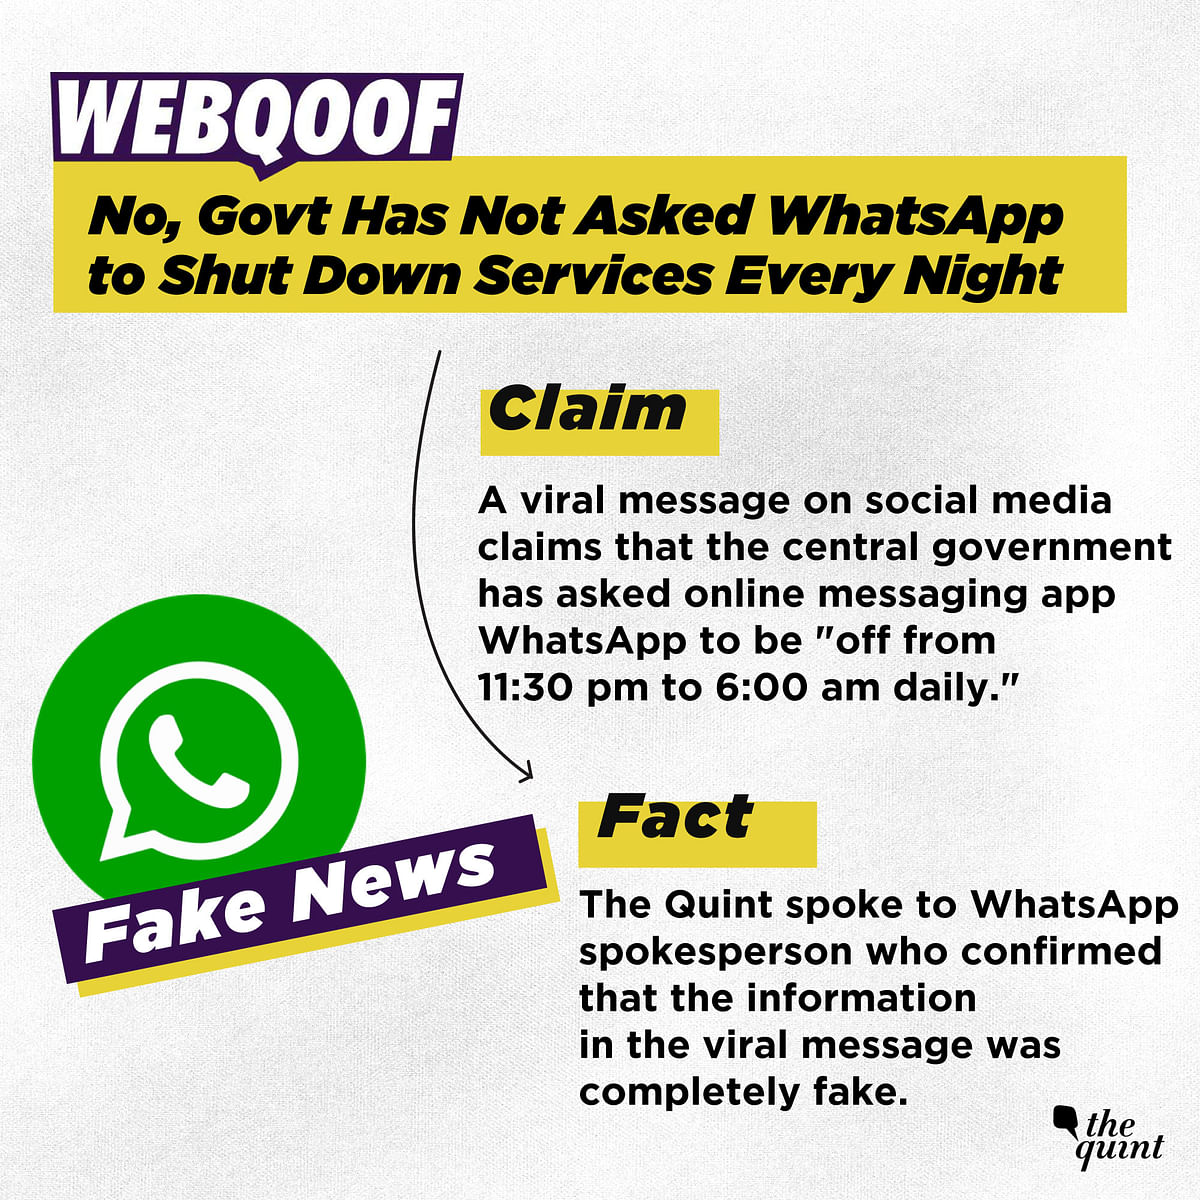 A WhatsApp spokesperson told The Quint that the message doing the rounds on social media is “inaccurate”.